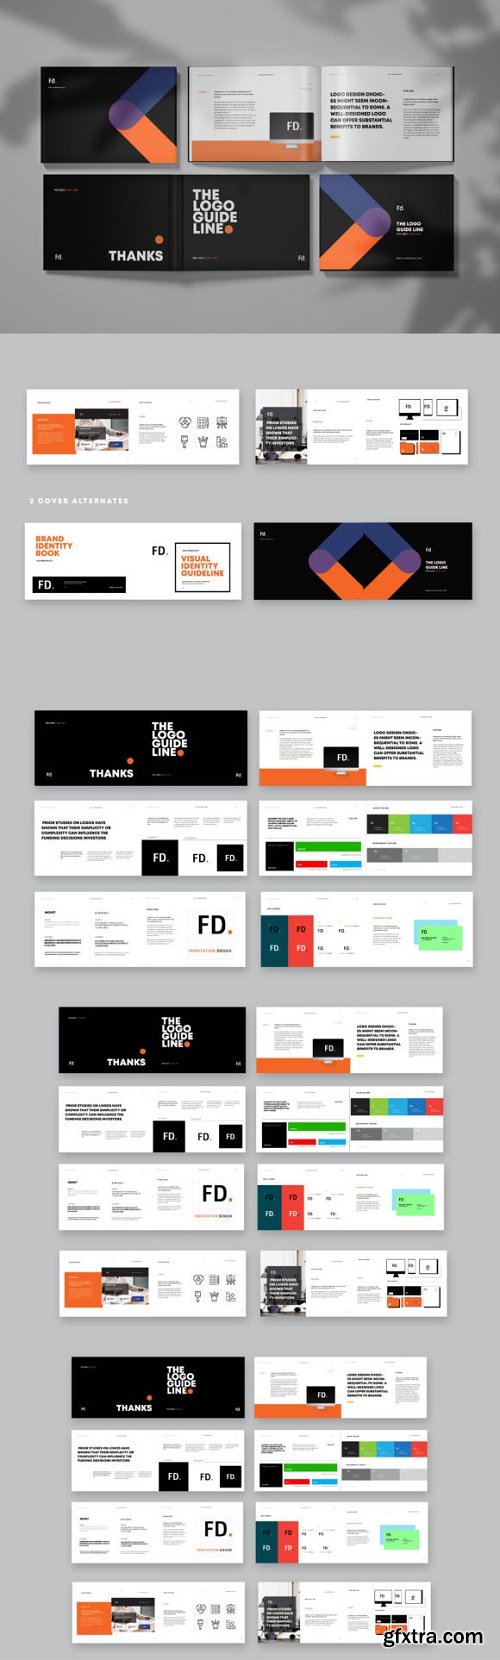 Brand Guidleline Template